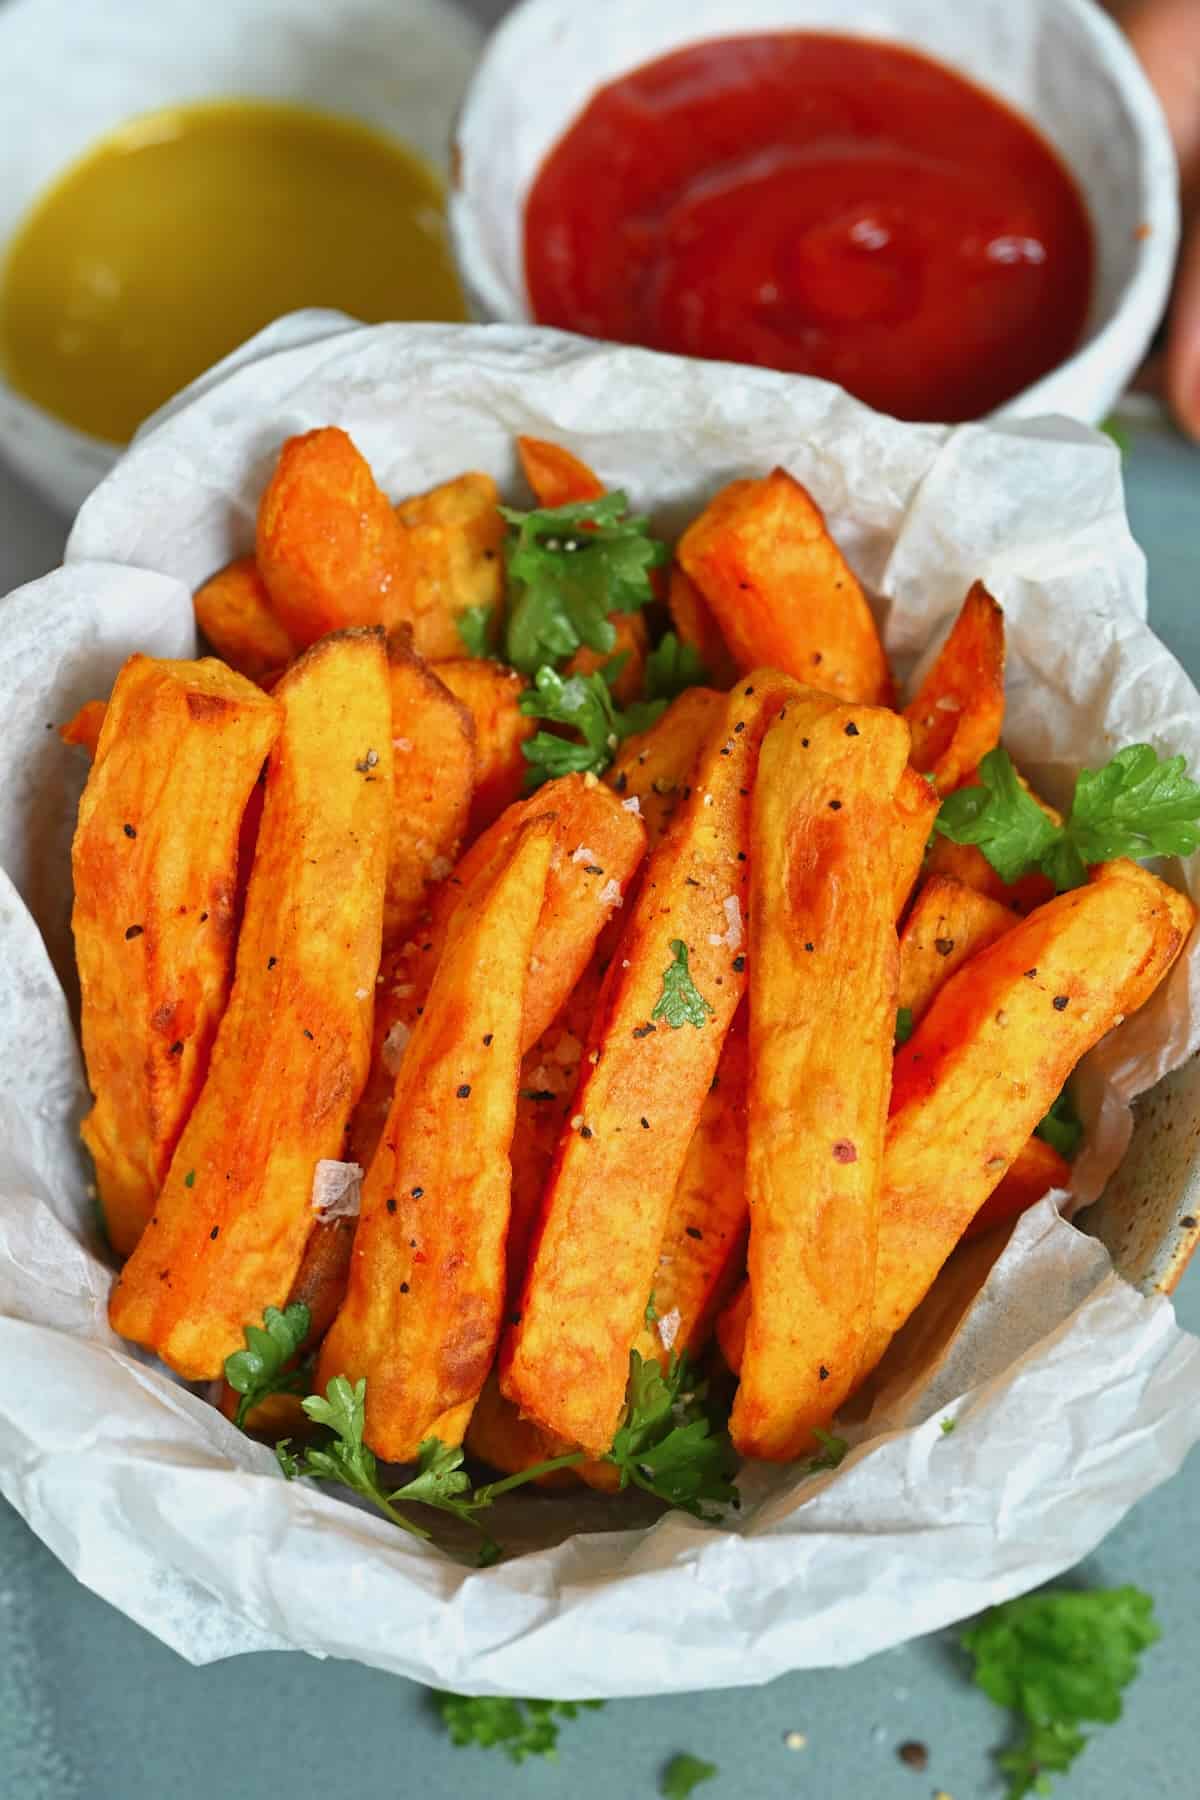 A serving of sweet potato fries made in the air fryer